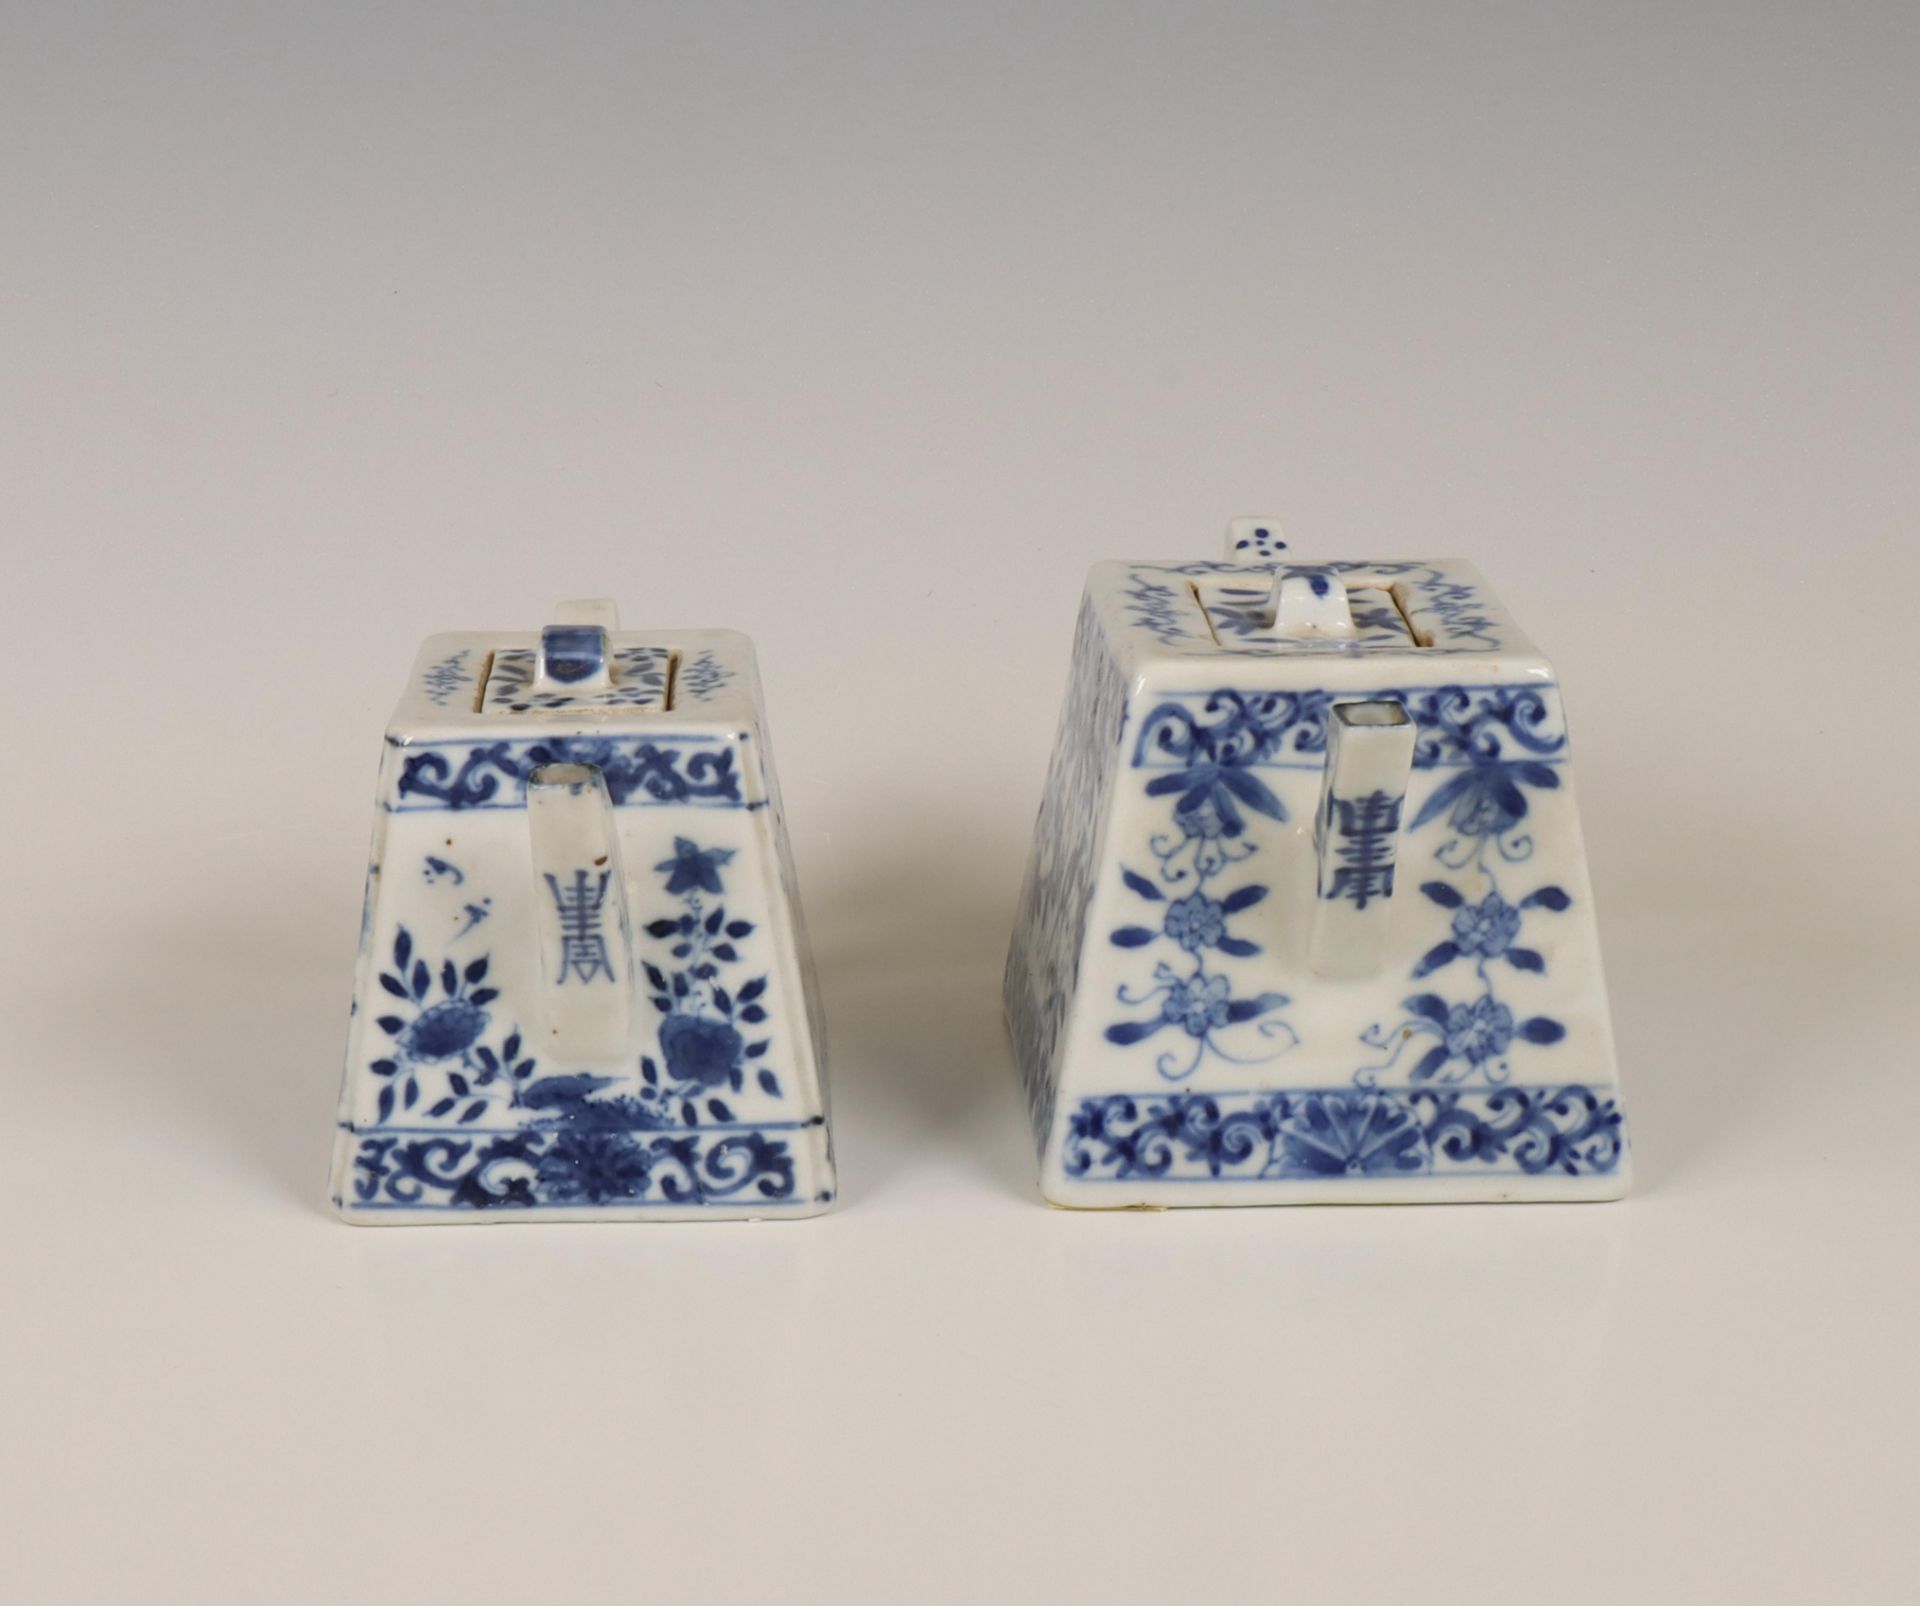 China, two blue and white porcelain rectangular teapots and covers, 18th century, - Image 3 of 5